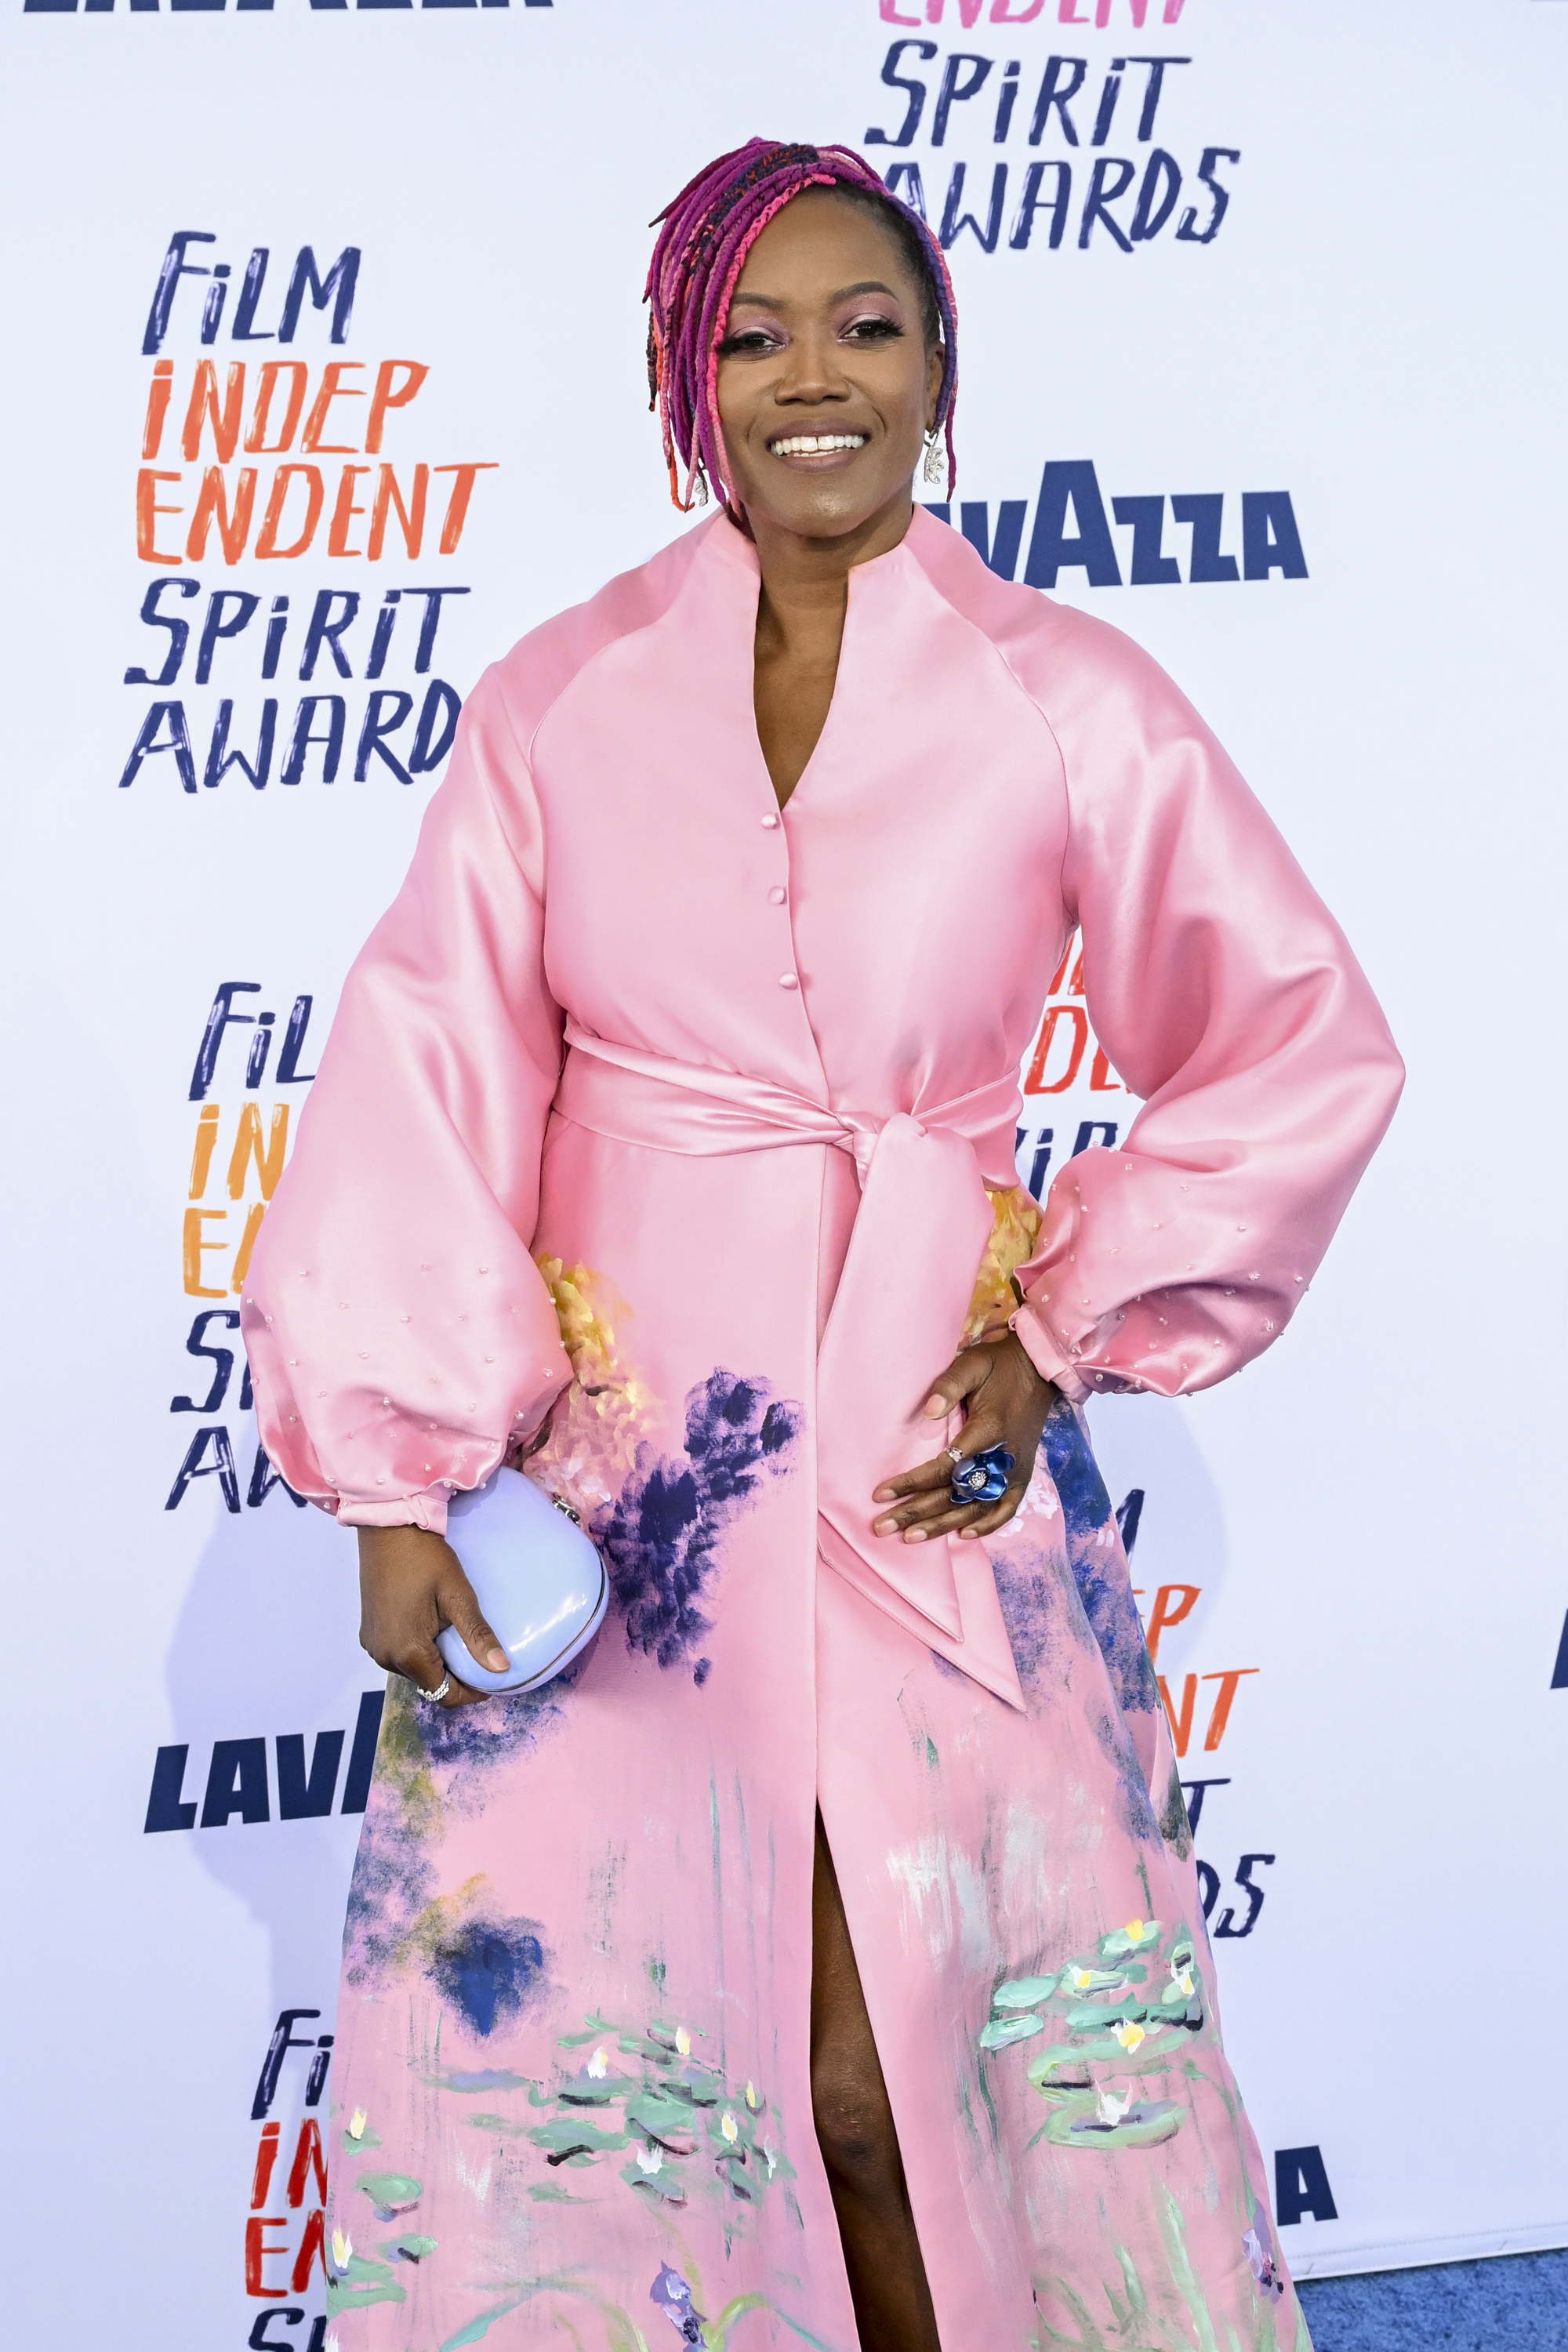 Erika in an outfit with balloon sleeves and painted accents, posing at the Film Independent Spirit Awards